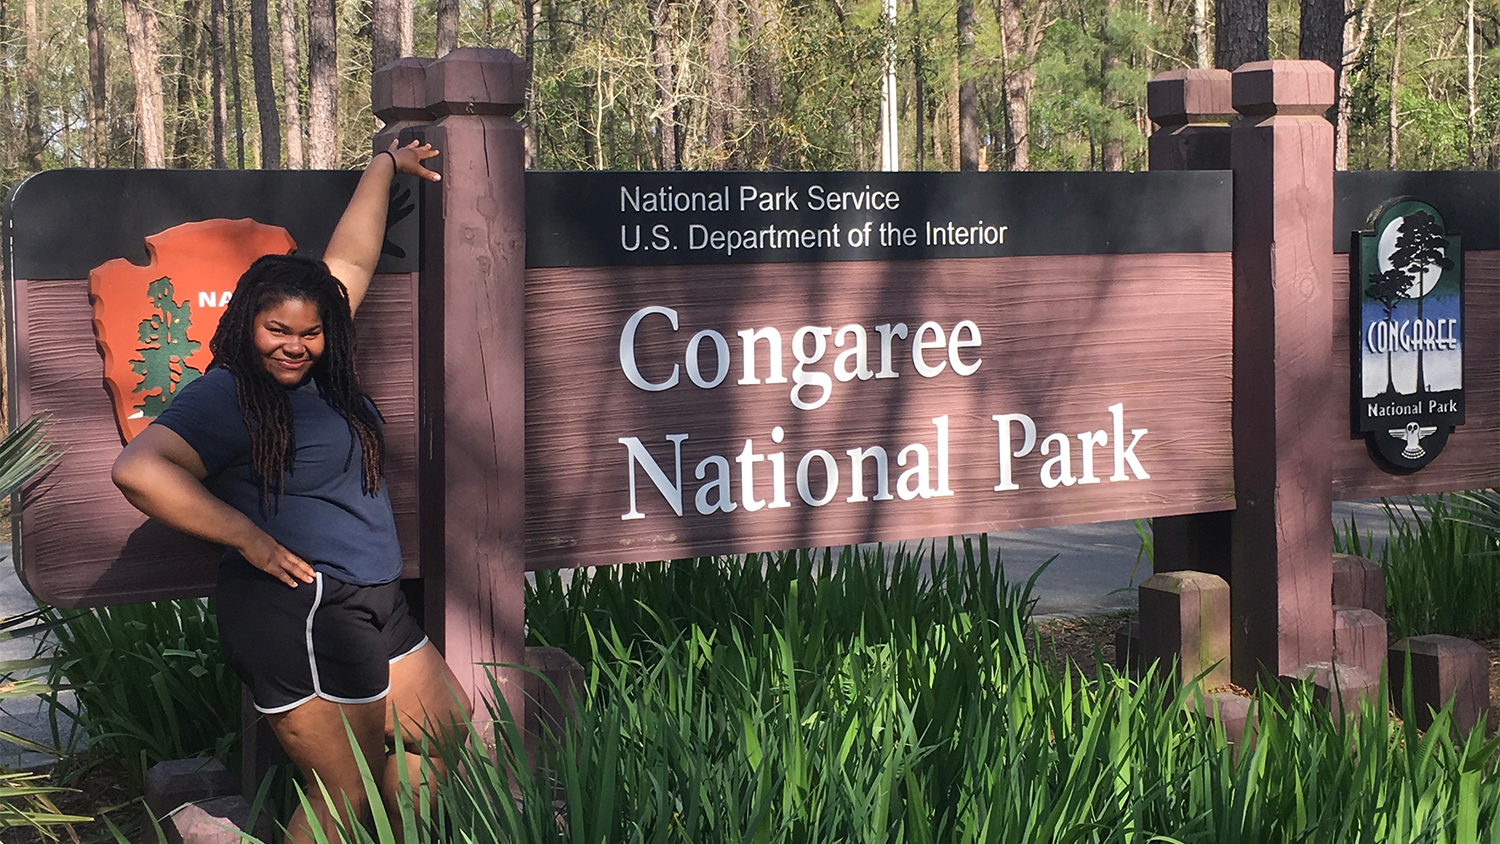 Roslynn poses in front of Congaree National Park sign